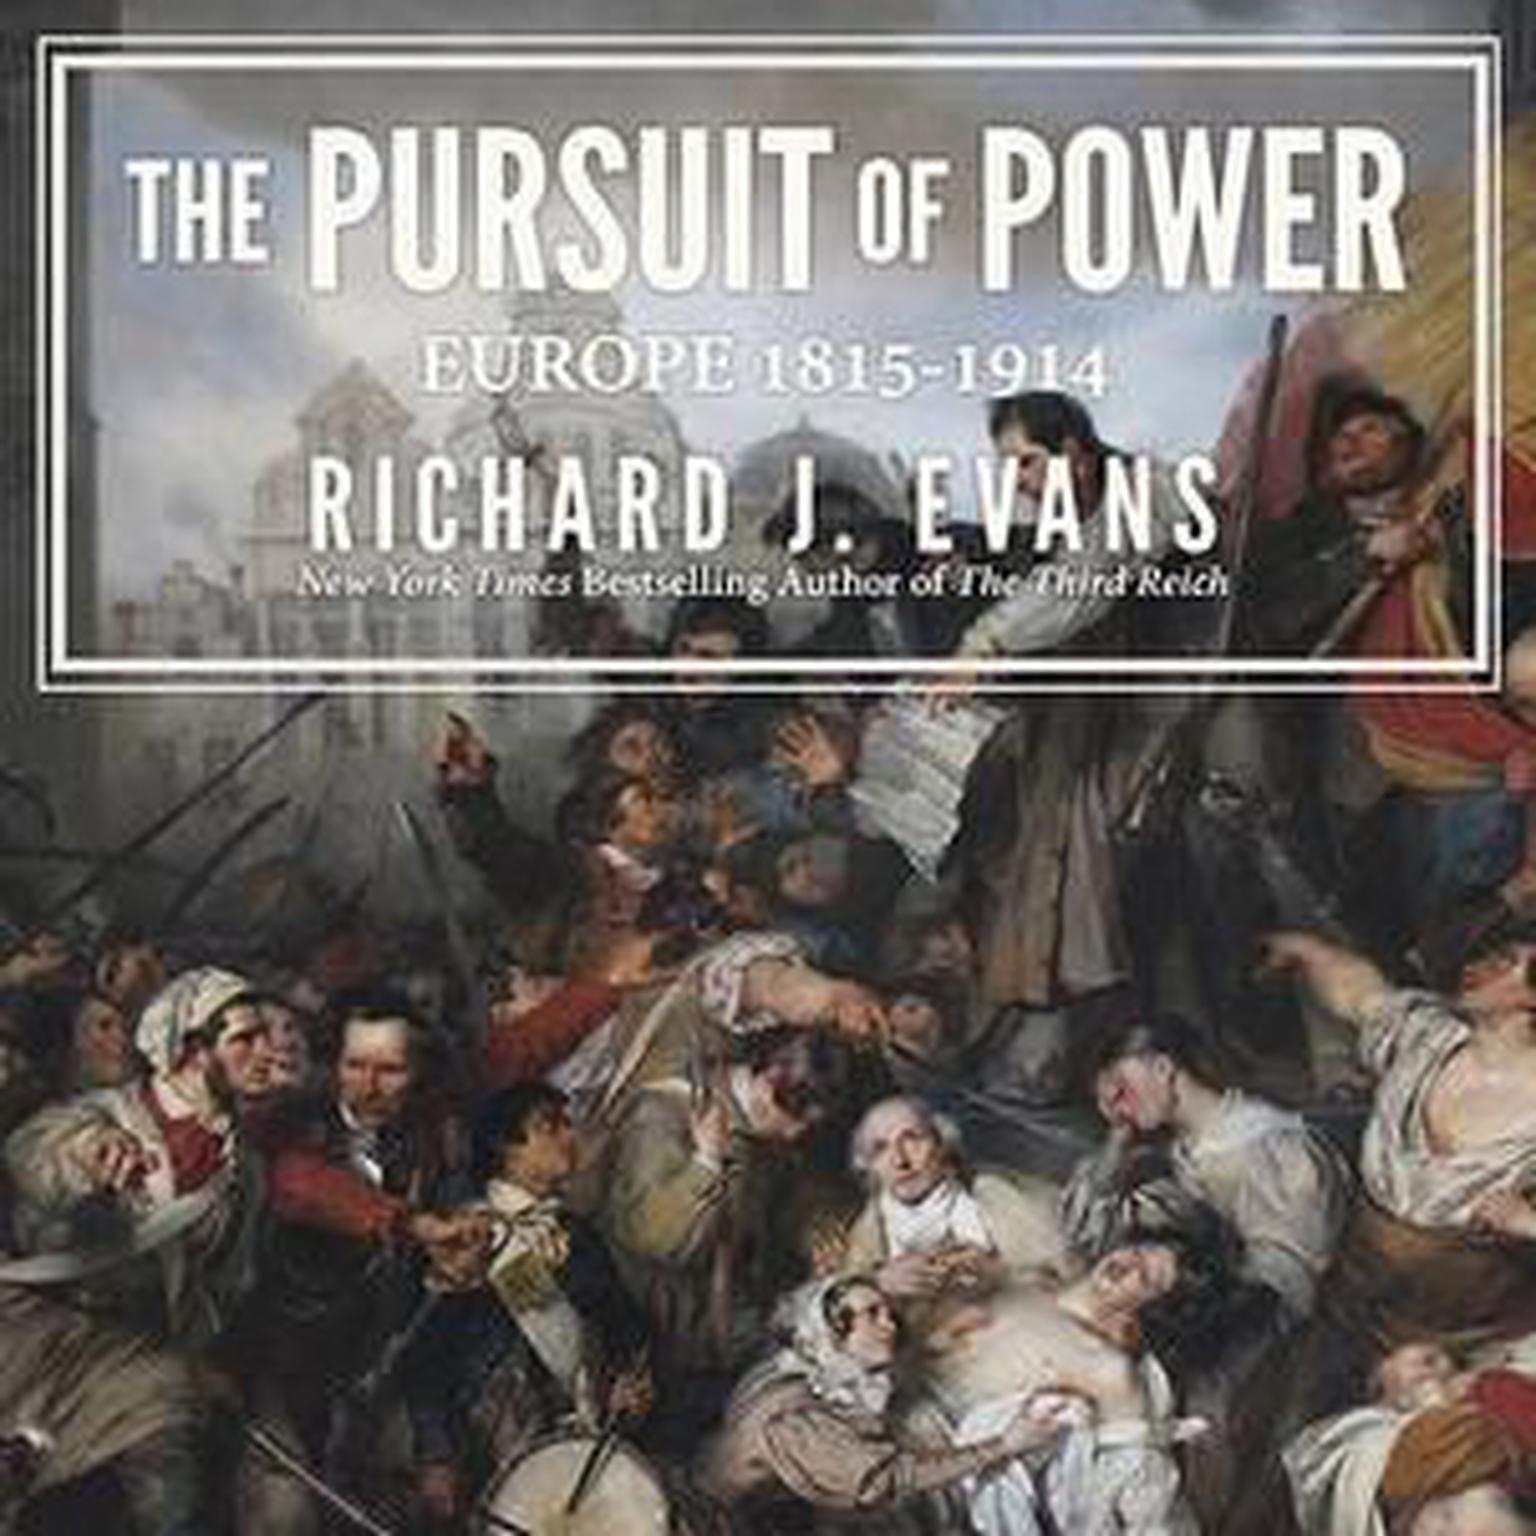 The Pursuit of Power: Europe: 1815-1914 Audiobook, by Richard J. Evans